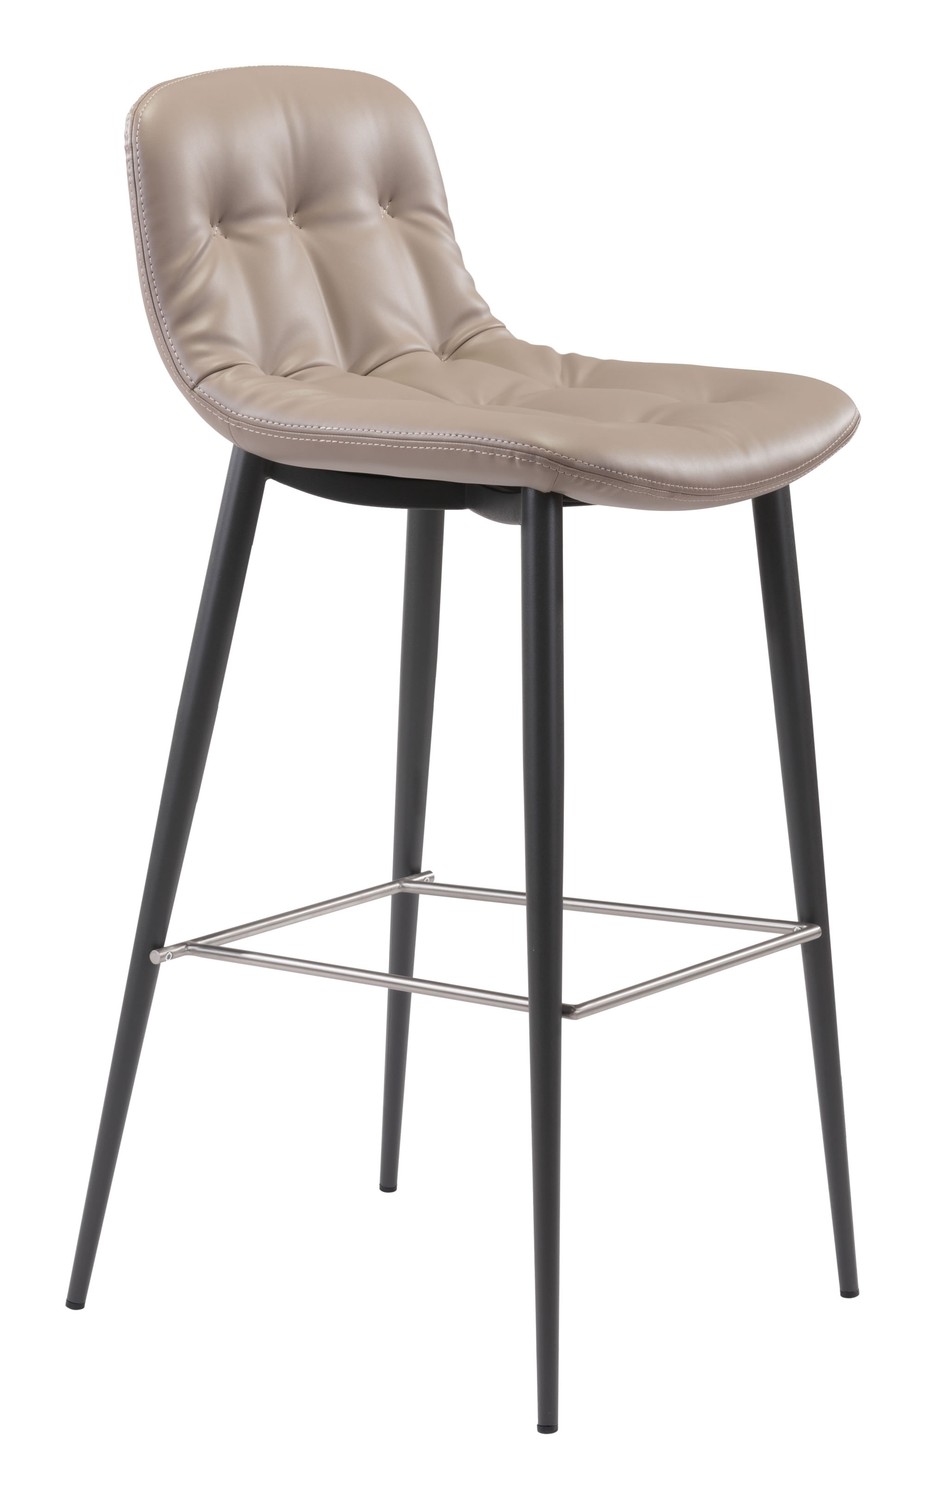 17.3" x 20.7" x 40.2" Taupe, Leatherette, Stainless Steel, Bar Chair - Set of 2